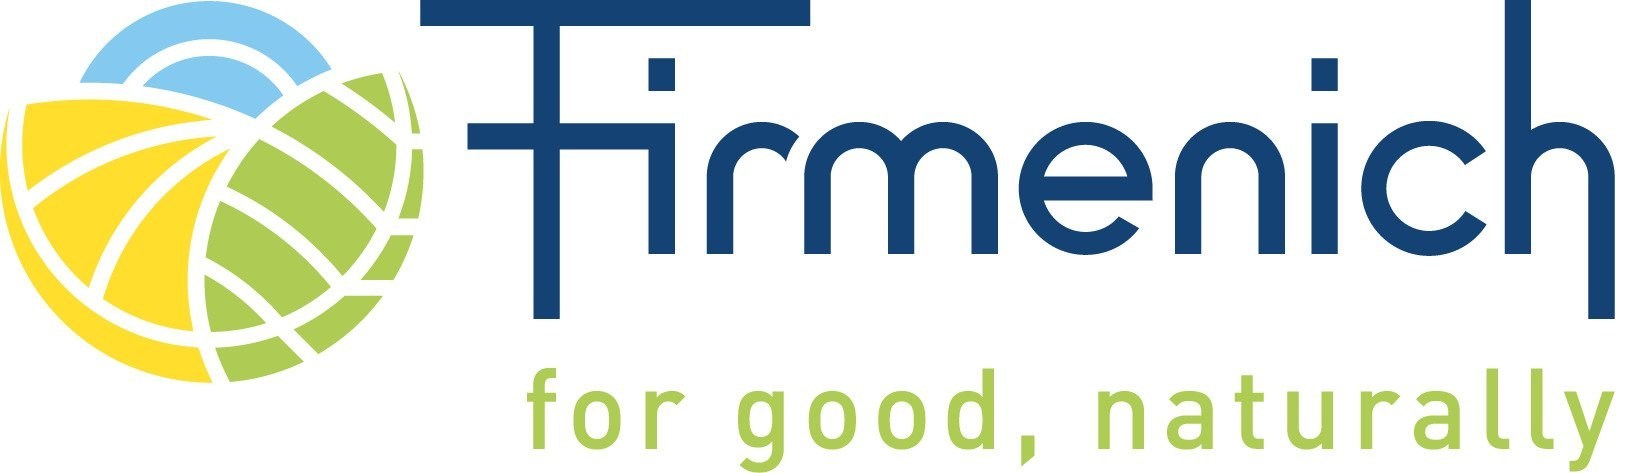 Firmenich Receives SBTi Approval For Emissions Goal 